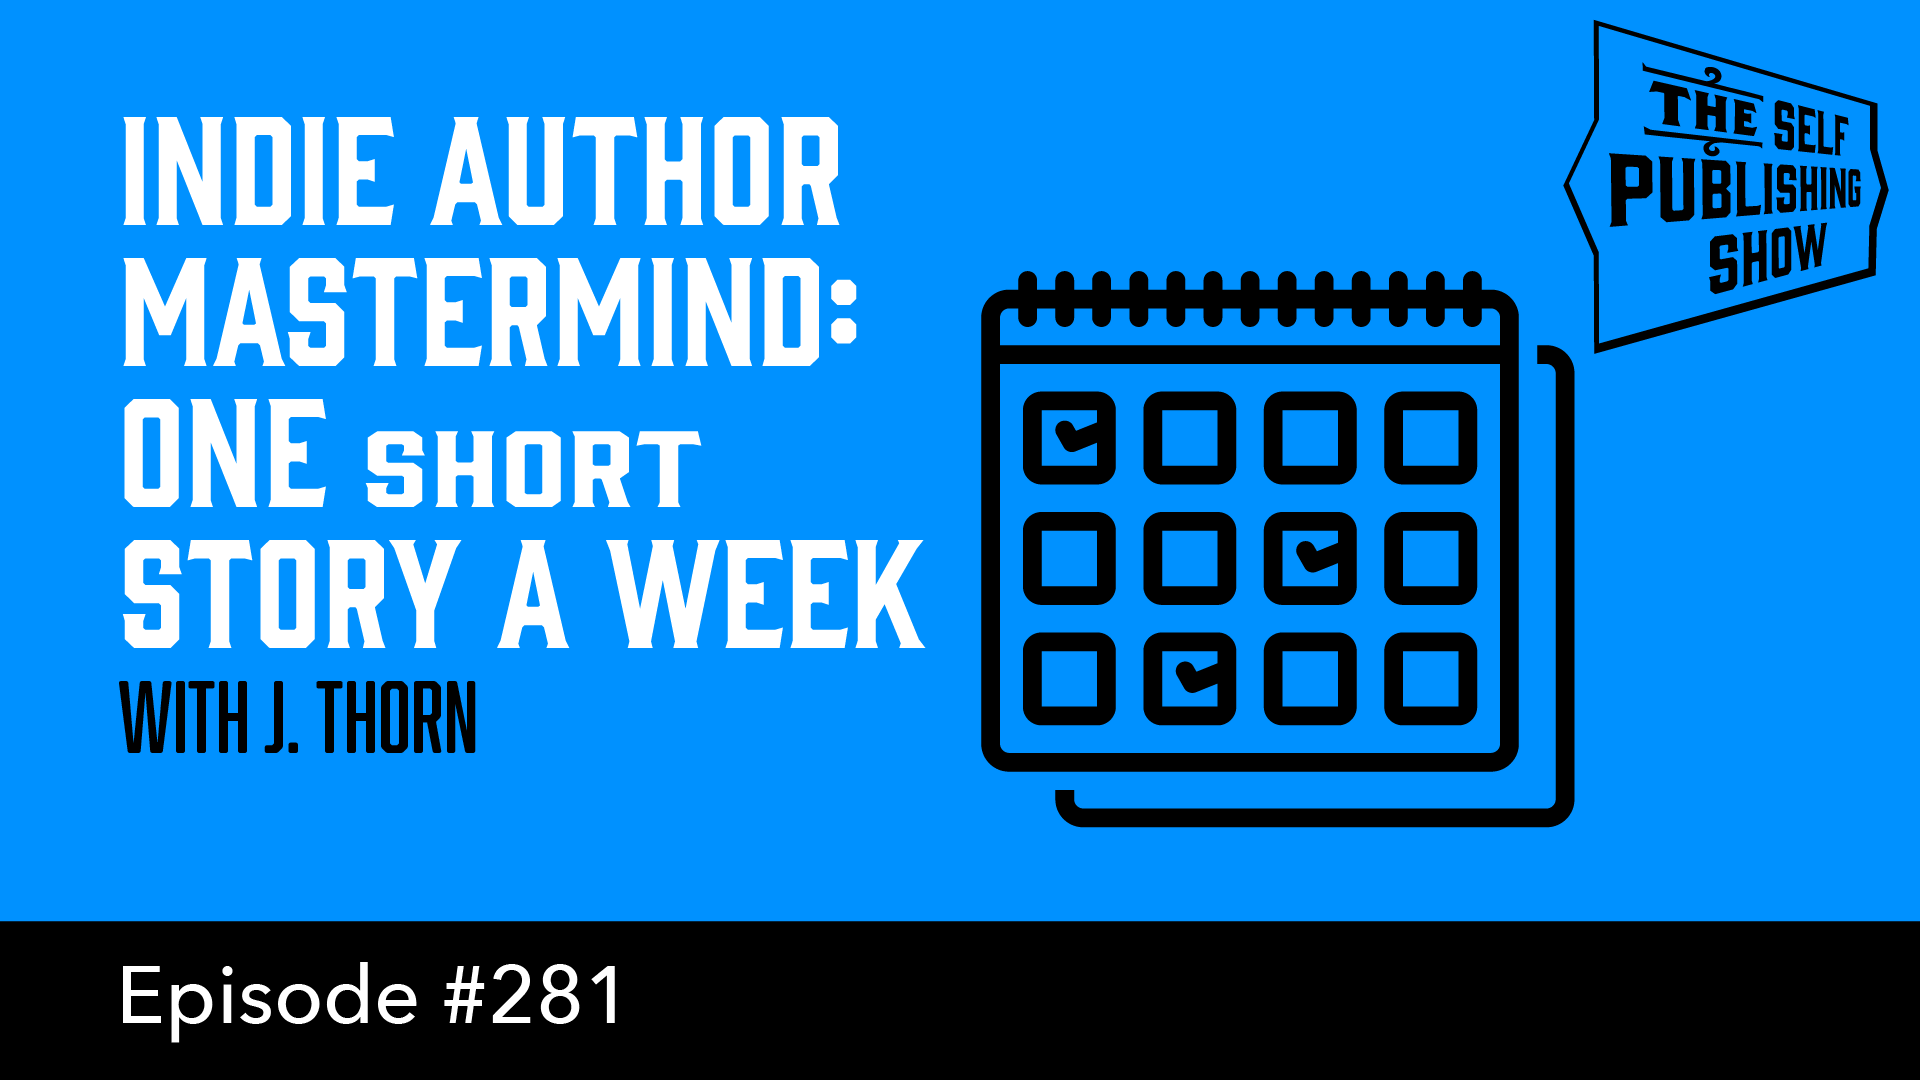 SPS-281: Indie Author Mastermind: One Short Story a Week – with J